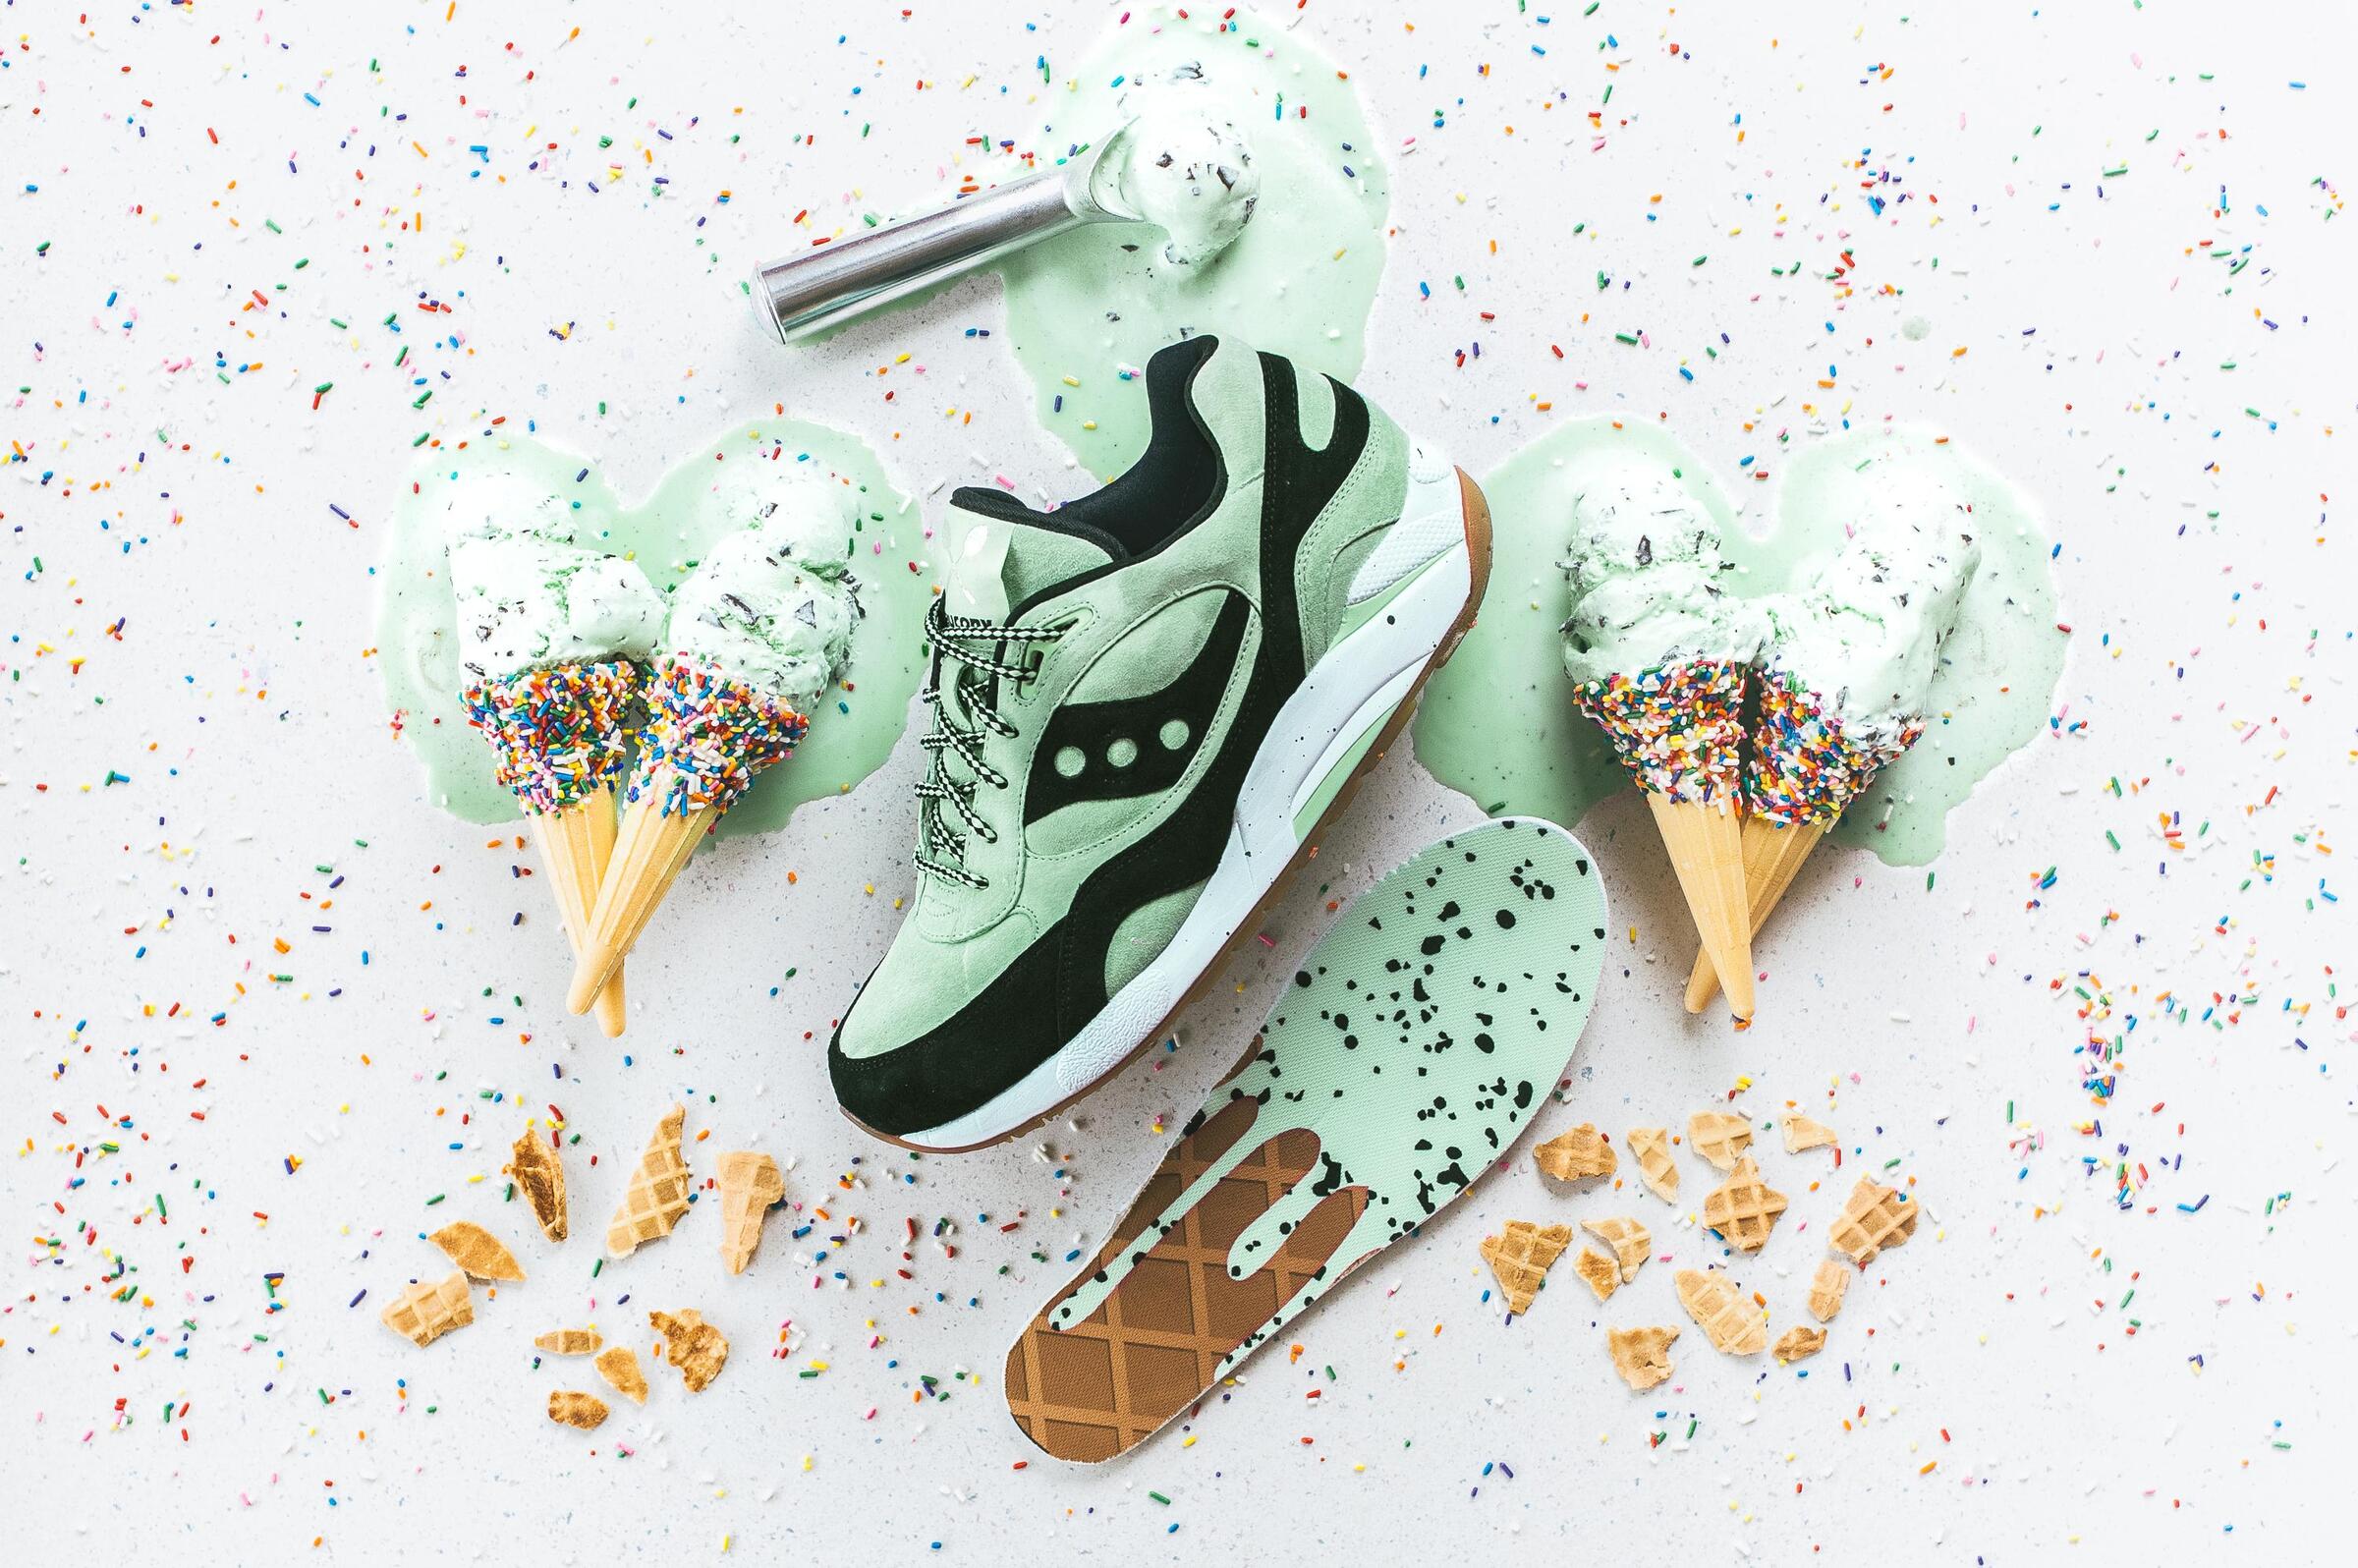 Saucony G9 Shadow 6 "Scoops Pack Green"